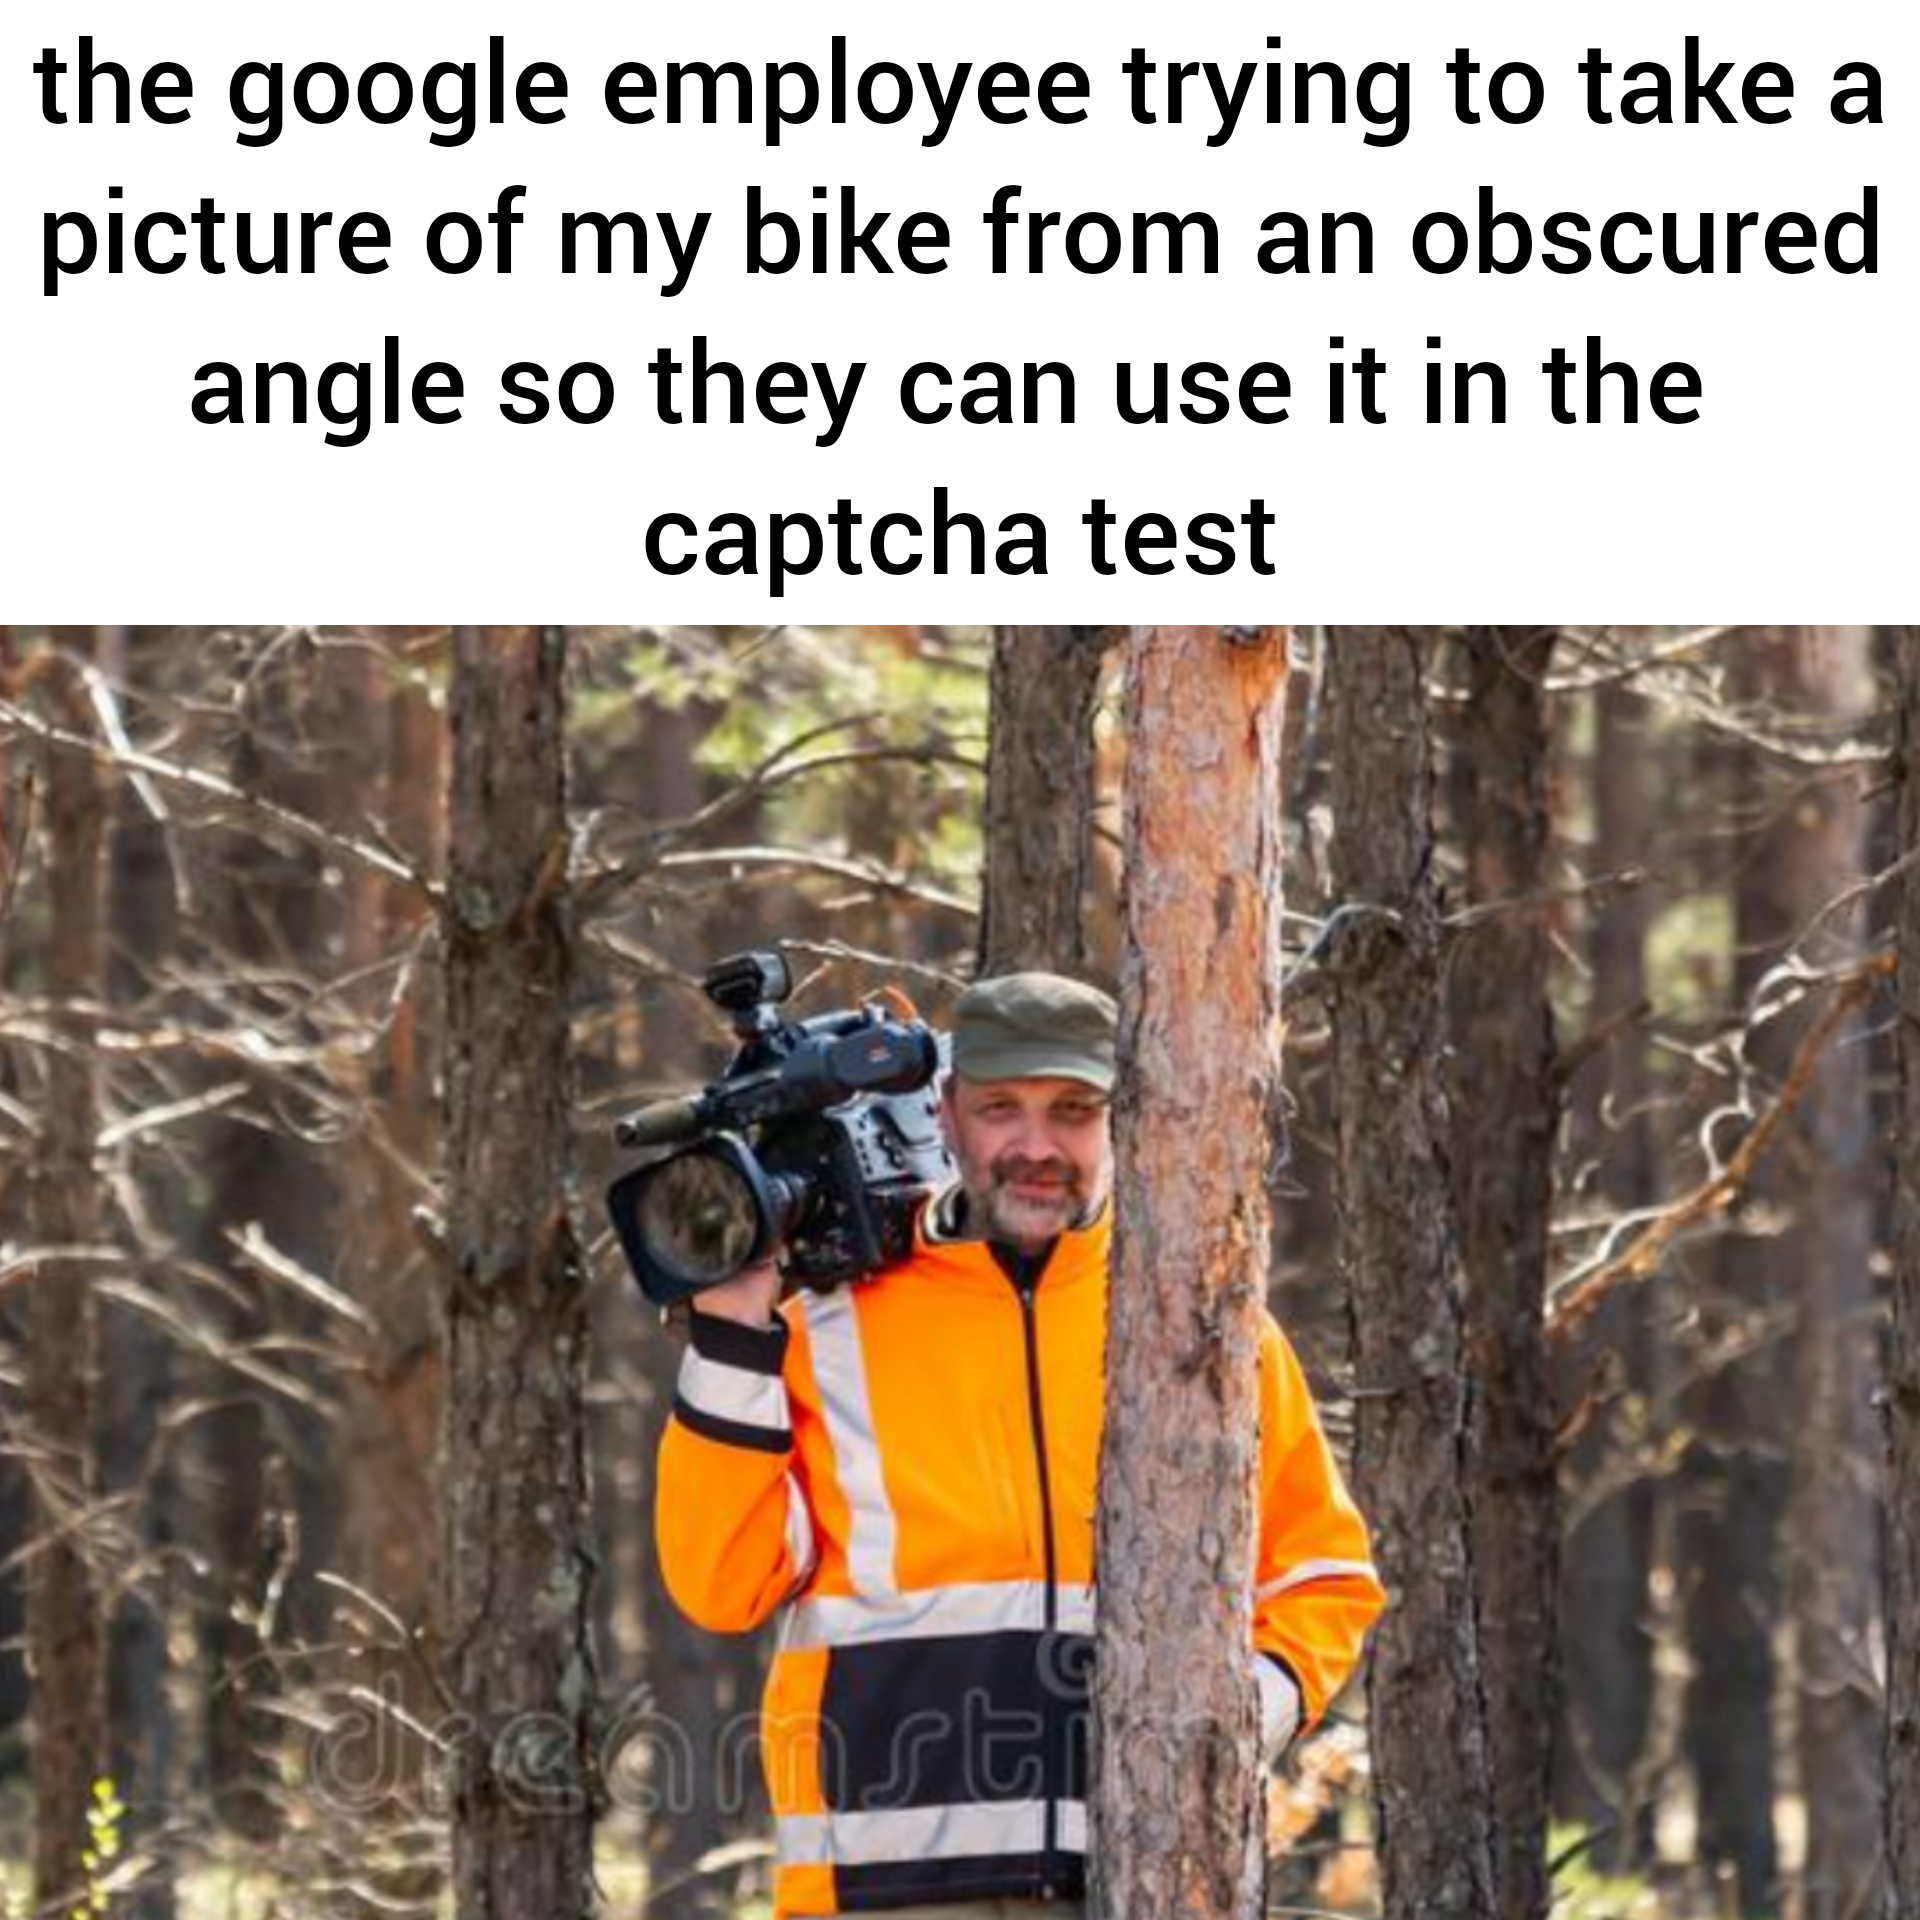 dank memes - tree - the google employee trying to take a picture of my bike from an obscured angle so they can use it in the captcha test consti